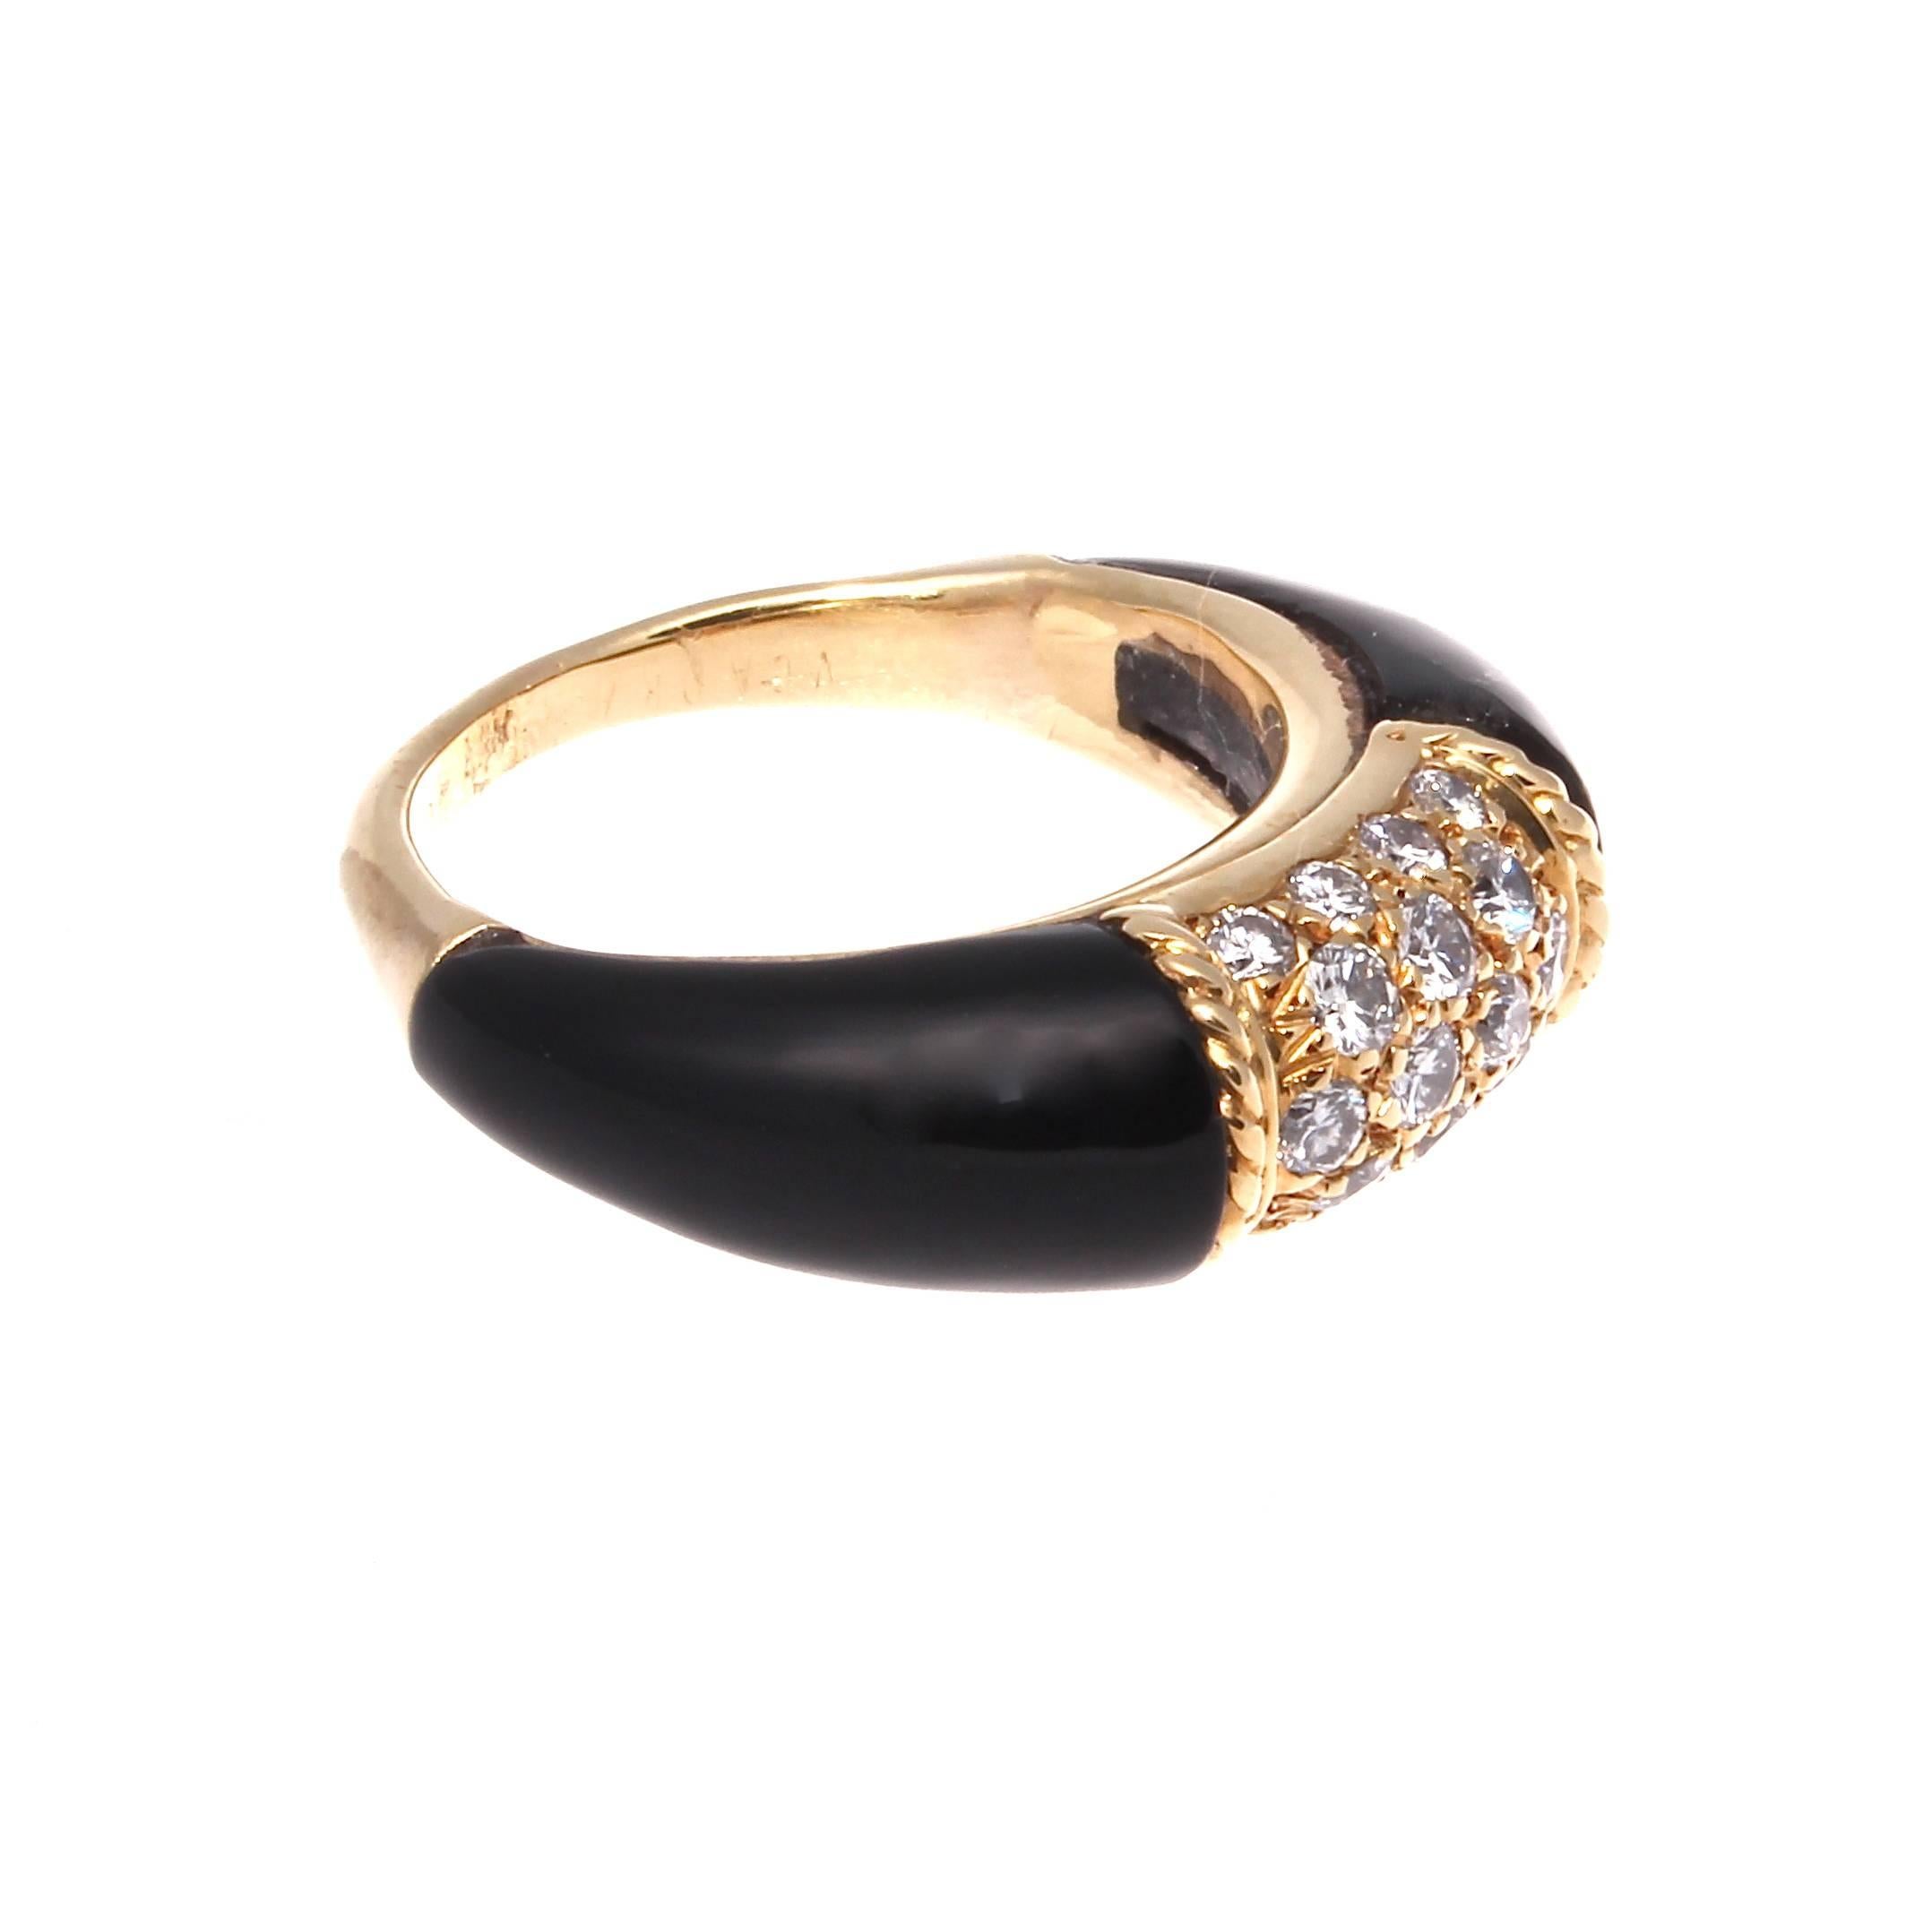 Van Cleef & Arpels, a long rich history of trend setting fashion that is still relevant today. Fashioned with sleek black onyx and numerous near colorless diamonds that are all brought together by the 18k yellow gold. Signed VCA and